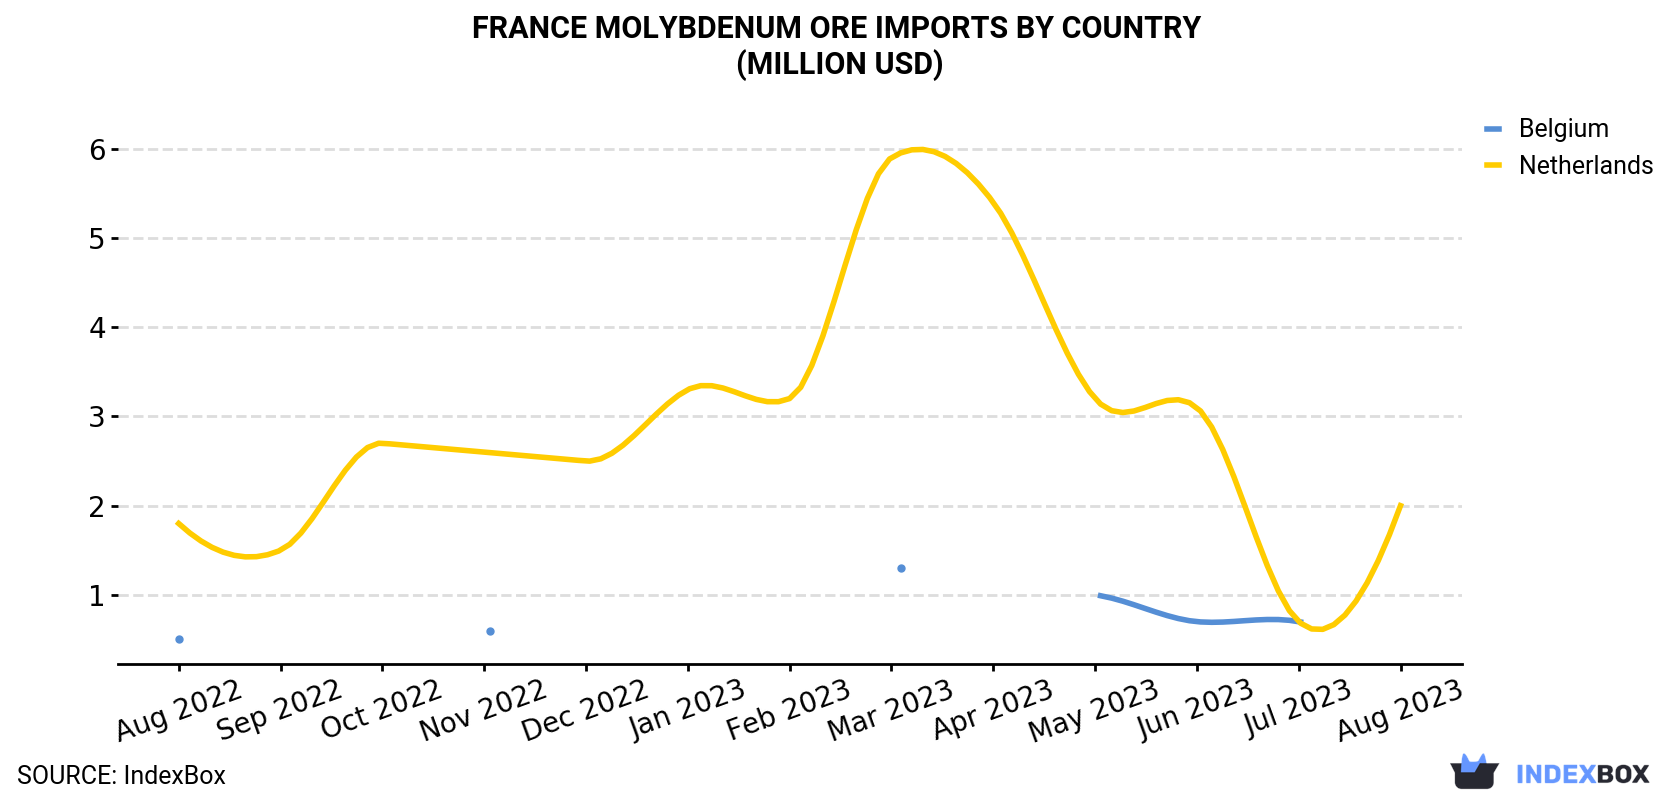 France Molybdenum Ore Imports By Country (Million USD)